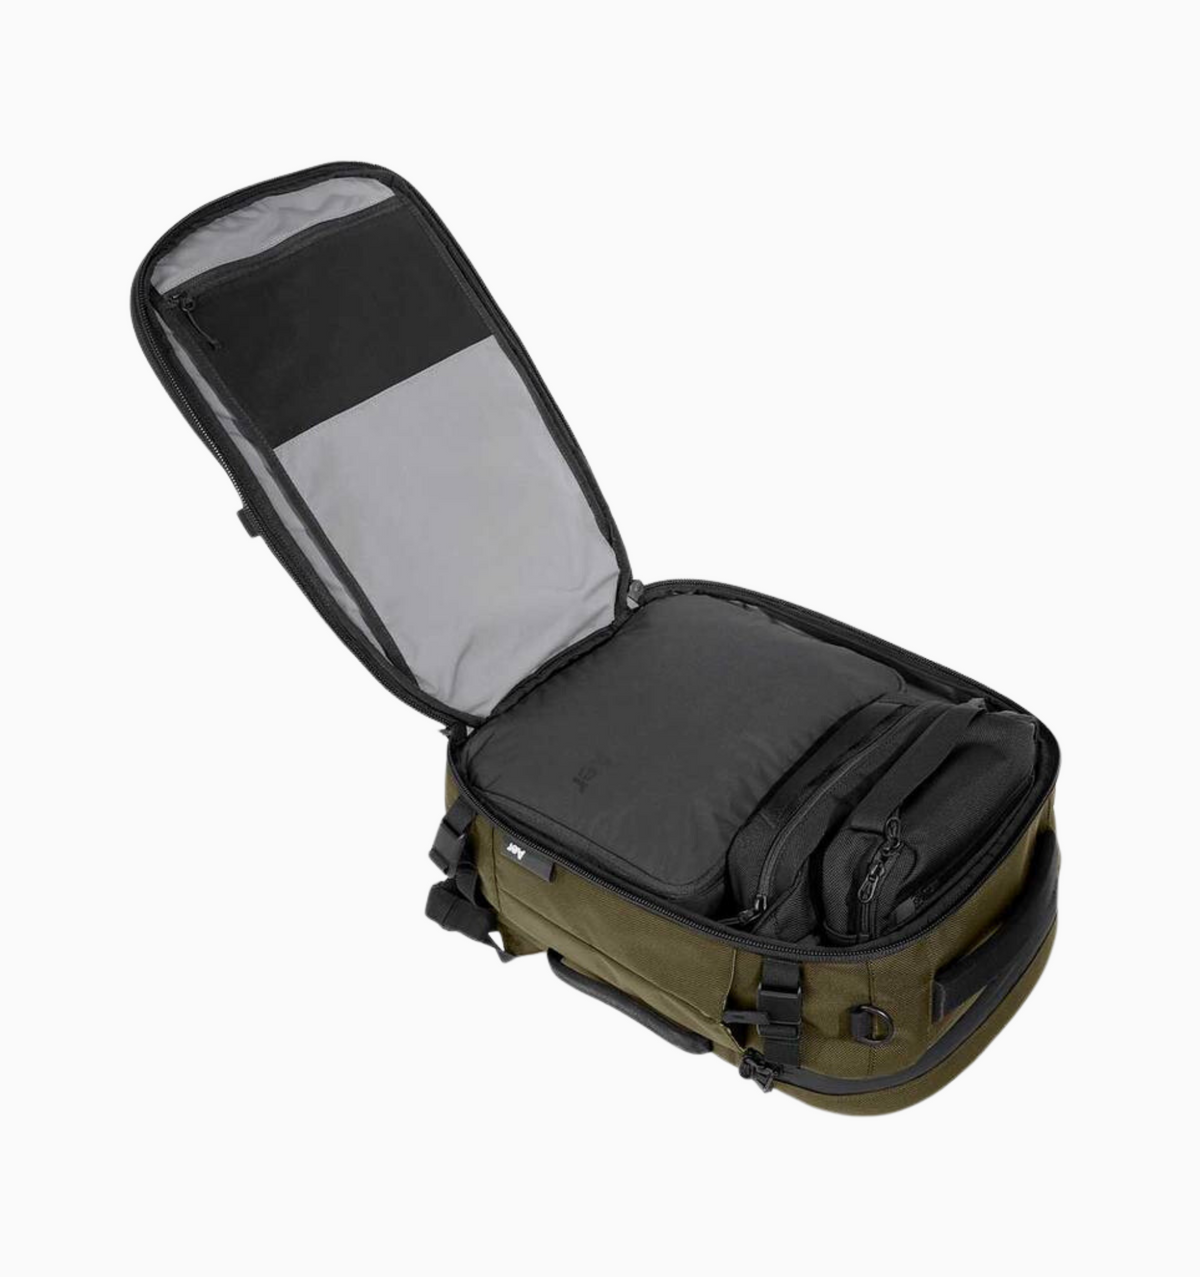 Aer 16" Travel Pack 3 Small 28L - Olive